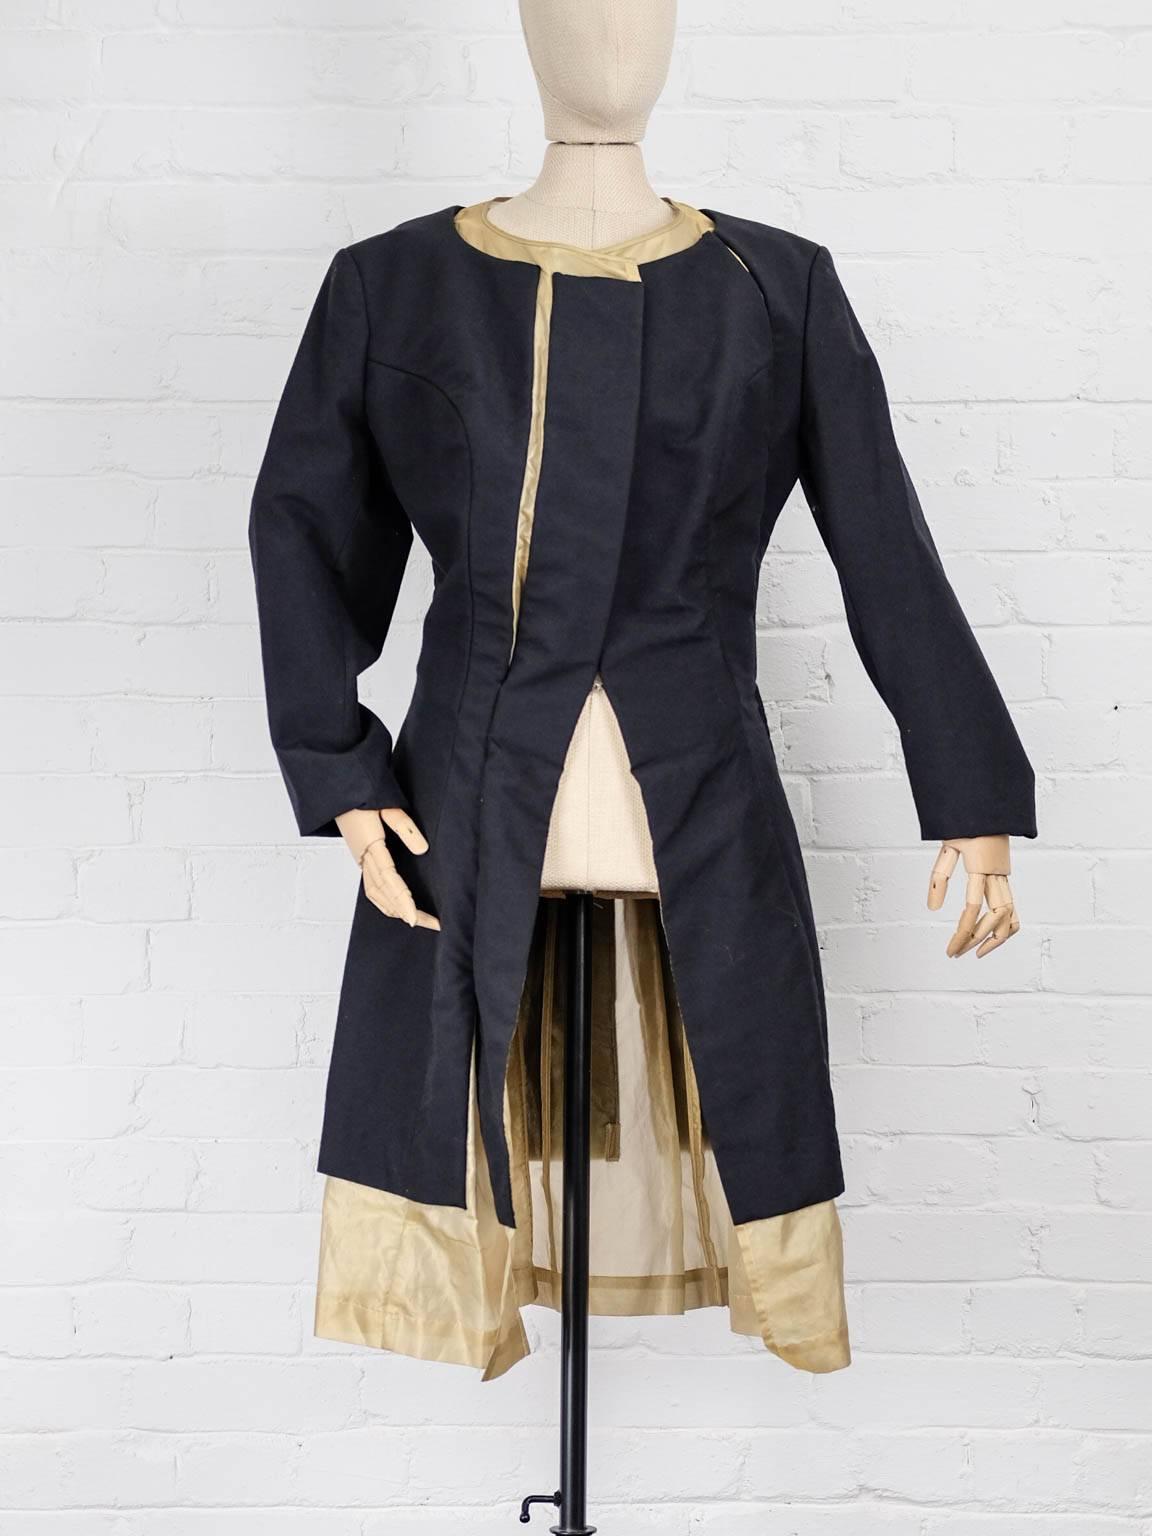 Fall 1997 Black and gold wool and silk blend layered coat, featuring a round neck, long sleeves, an open front, a mid-length, slashes and fully padded.

Total Lenght 107cm
Waist 79cm
Bust 92cm
Sleeve 62cm
Back Widht 47cm
